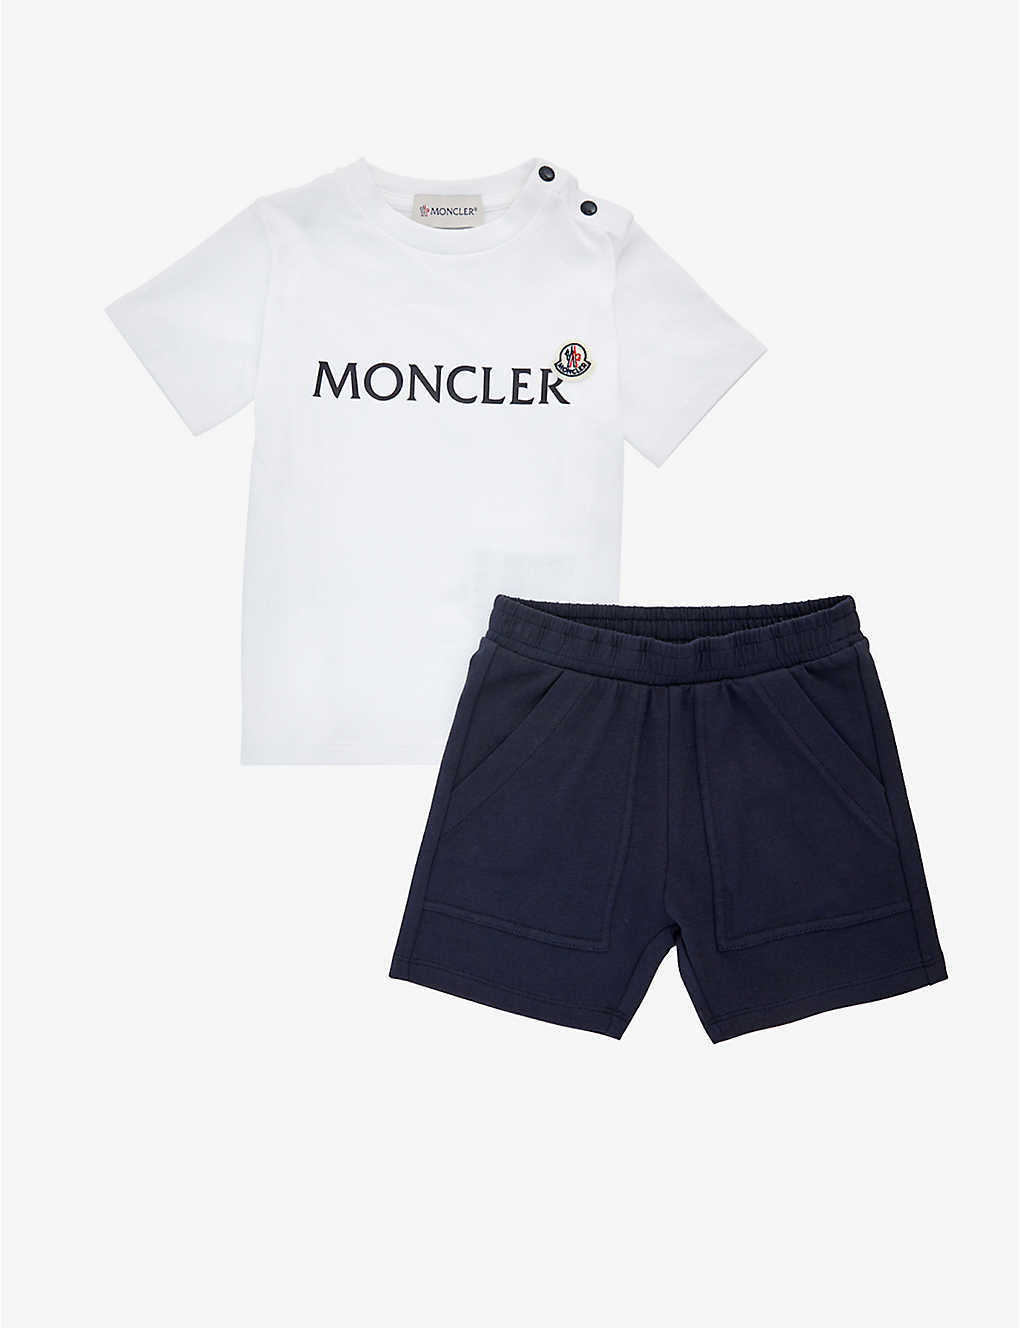 Moncler Kids' Branded T-shirt And Shorts Set White